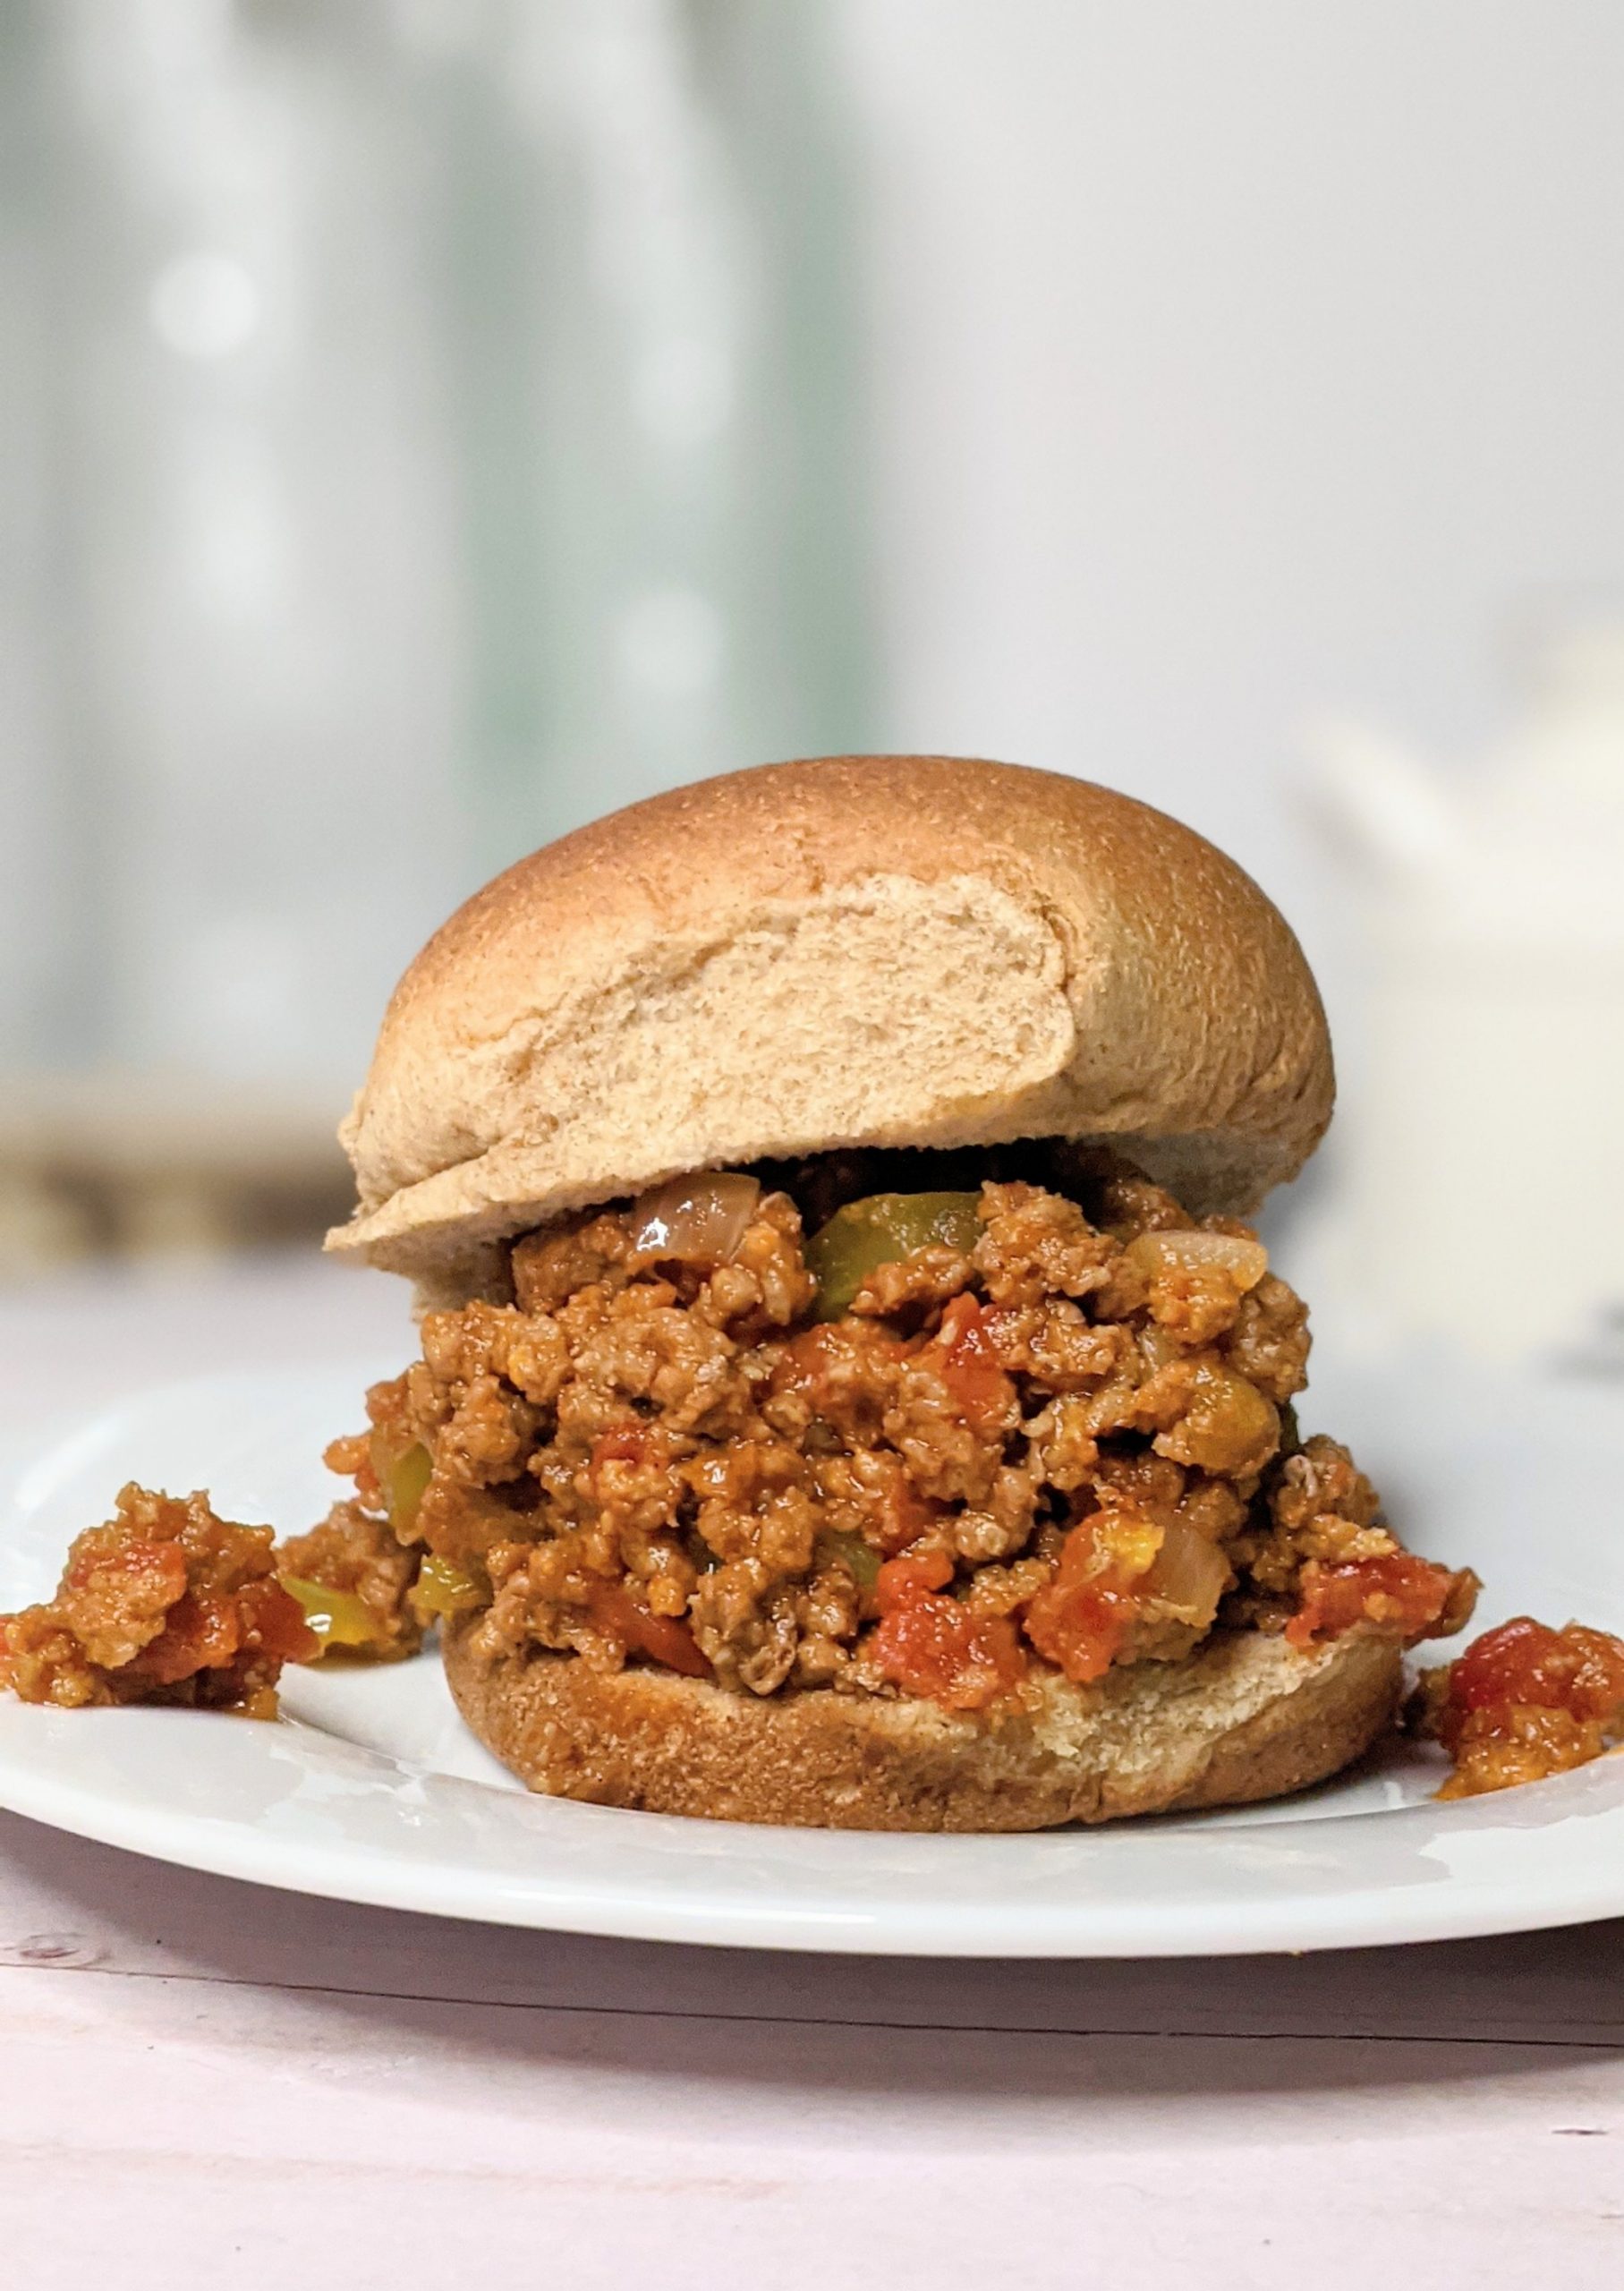 make sloppy joes gluten free dinner recipes peppers ground beef sandwiches low sodium recipes for kids and families low salt dinner ideas